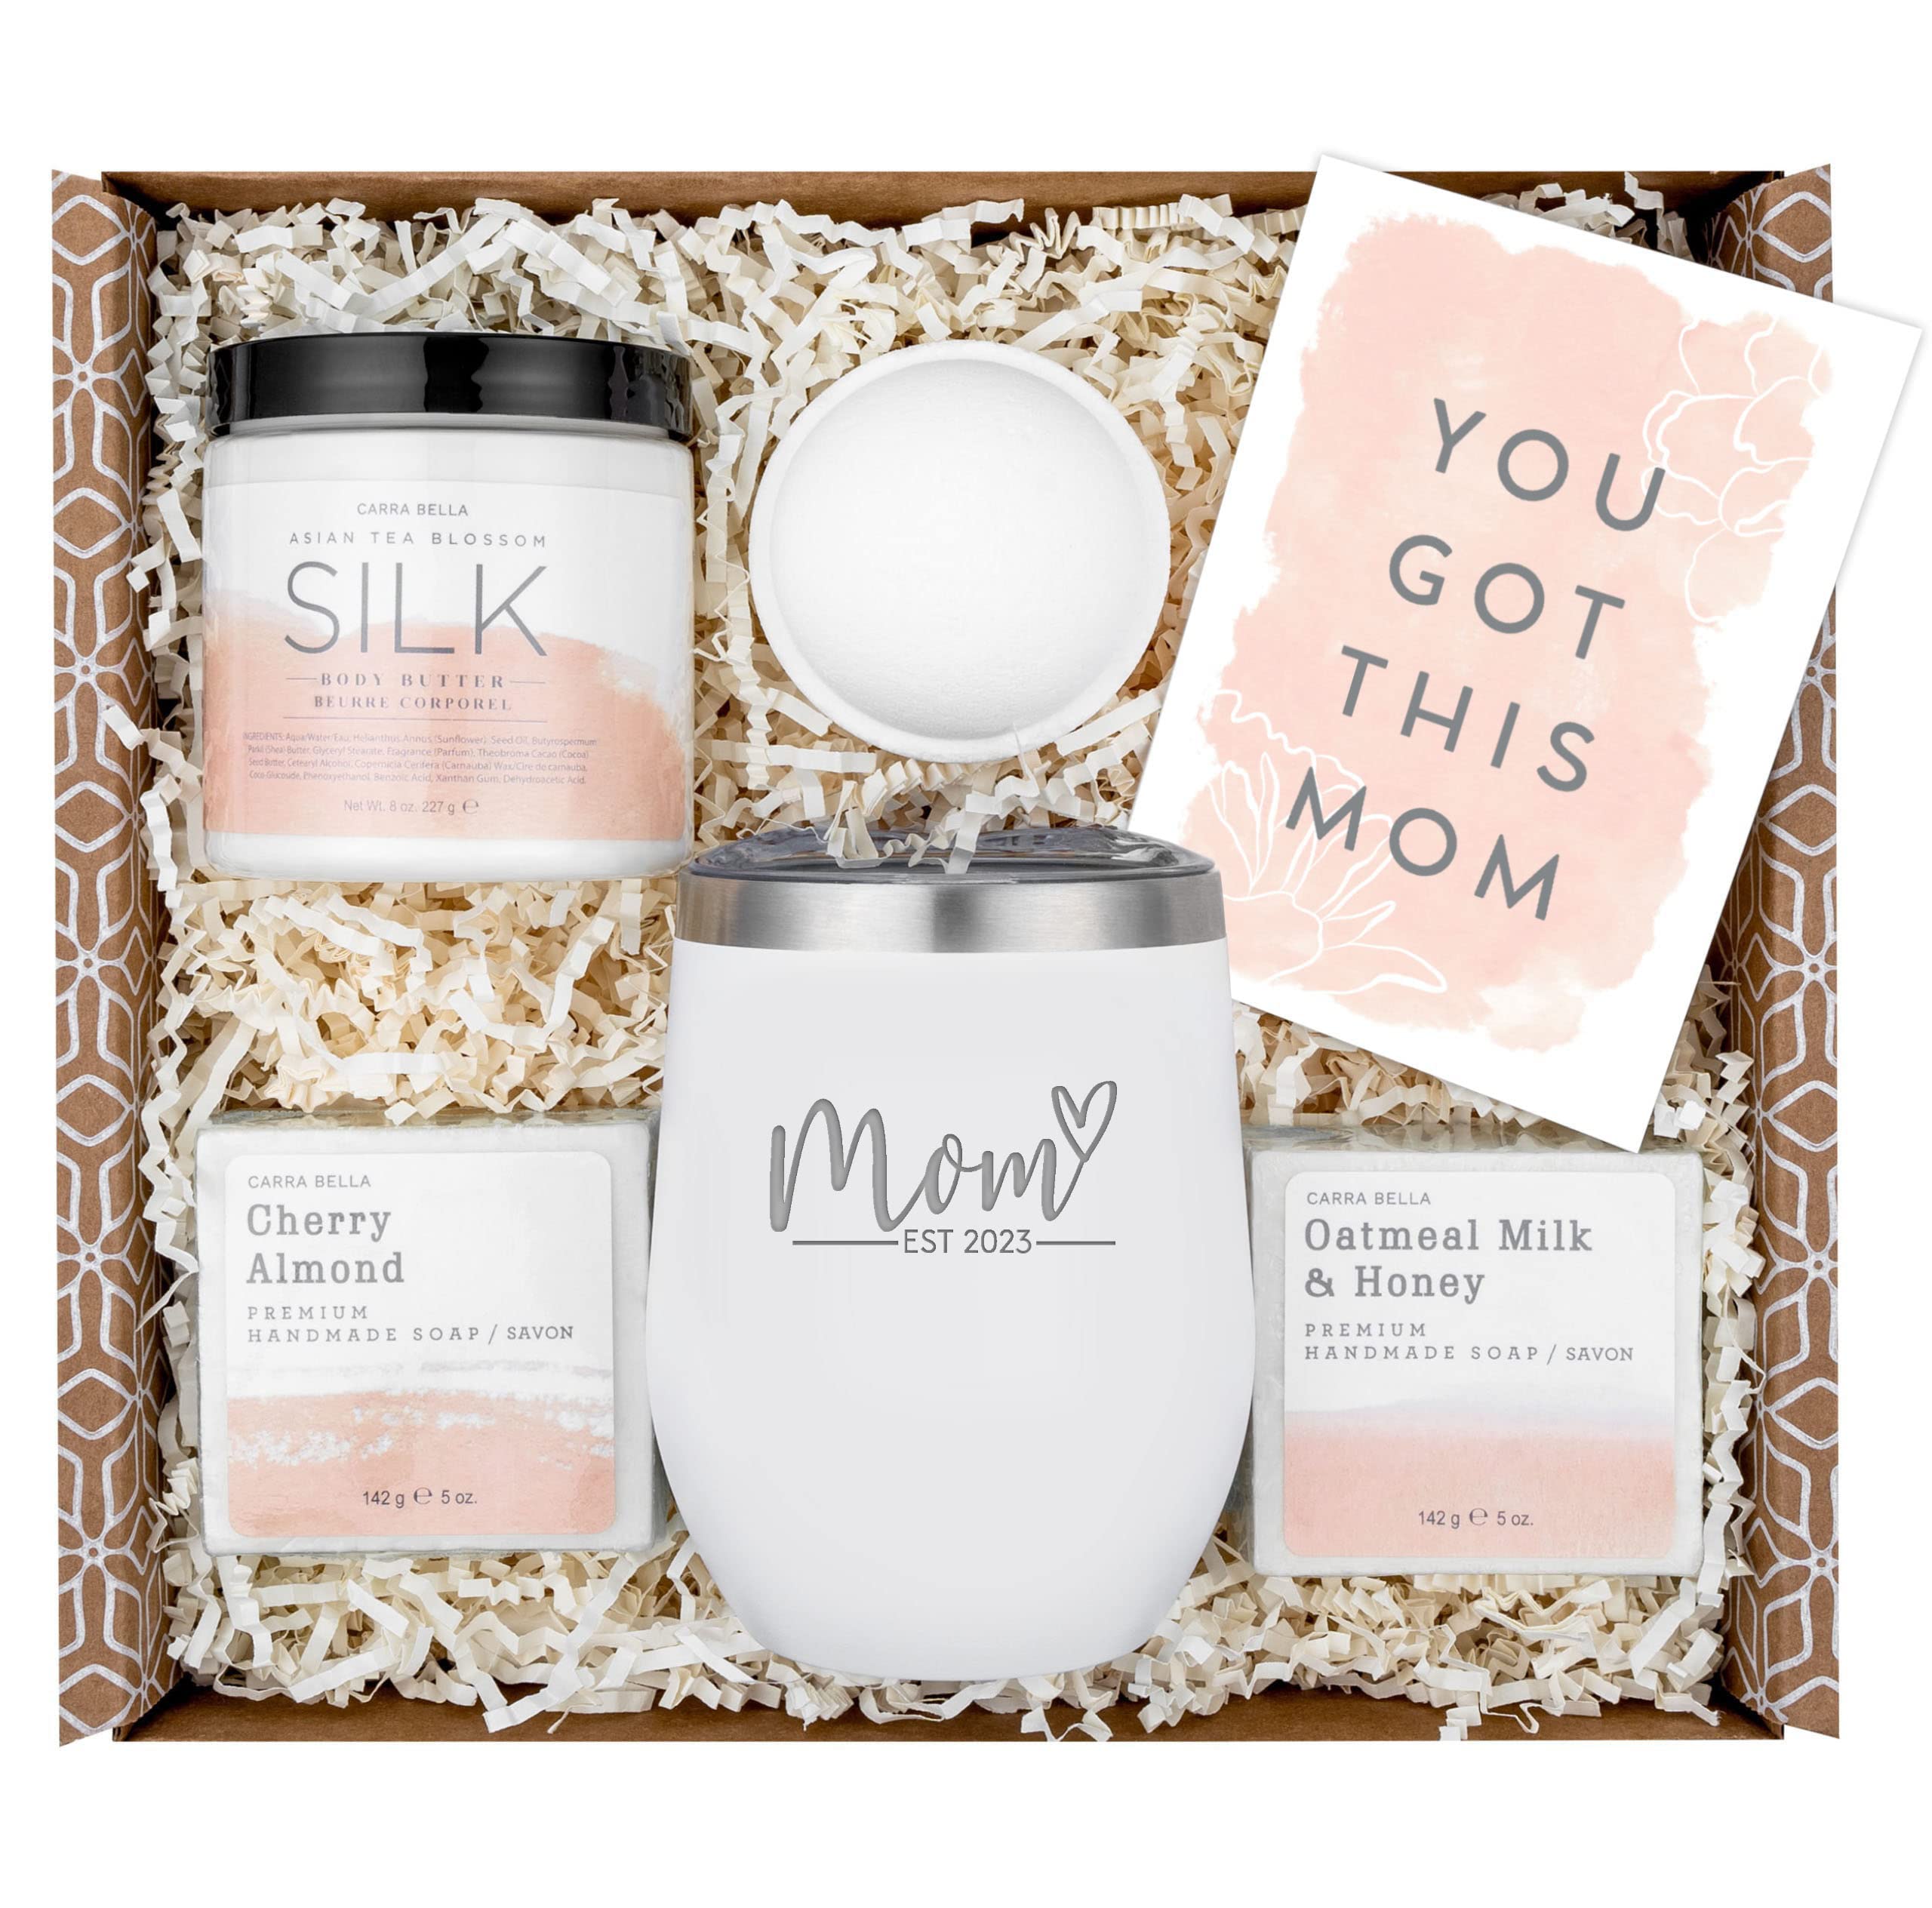 Mom to Be Gift Box | Beets & Apples